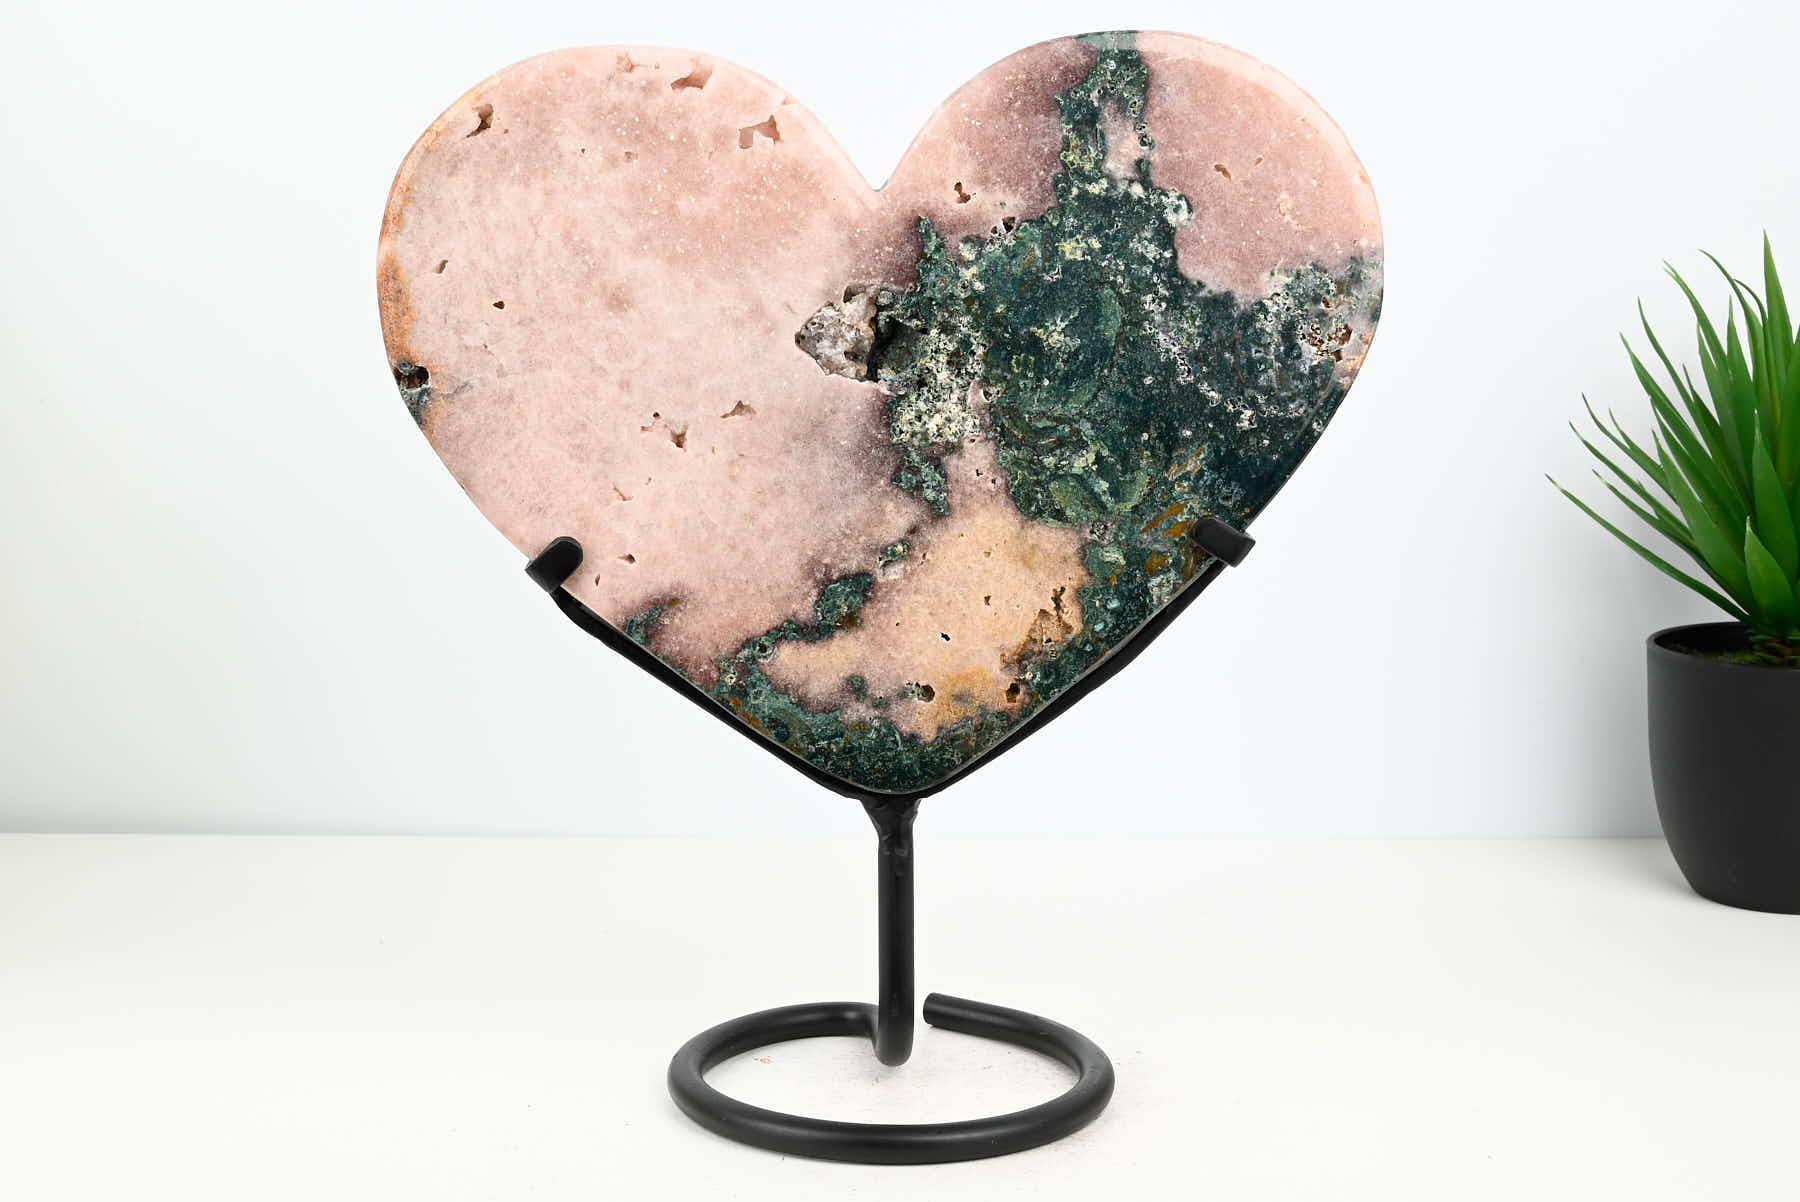 Extra Quality Pink Amethyst Heart - 2.84kg, 27cm high - #HTPINK-34025